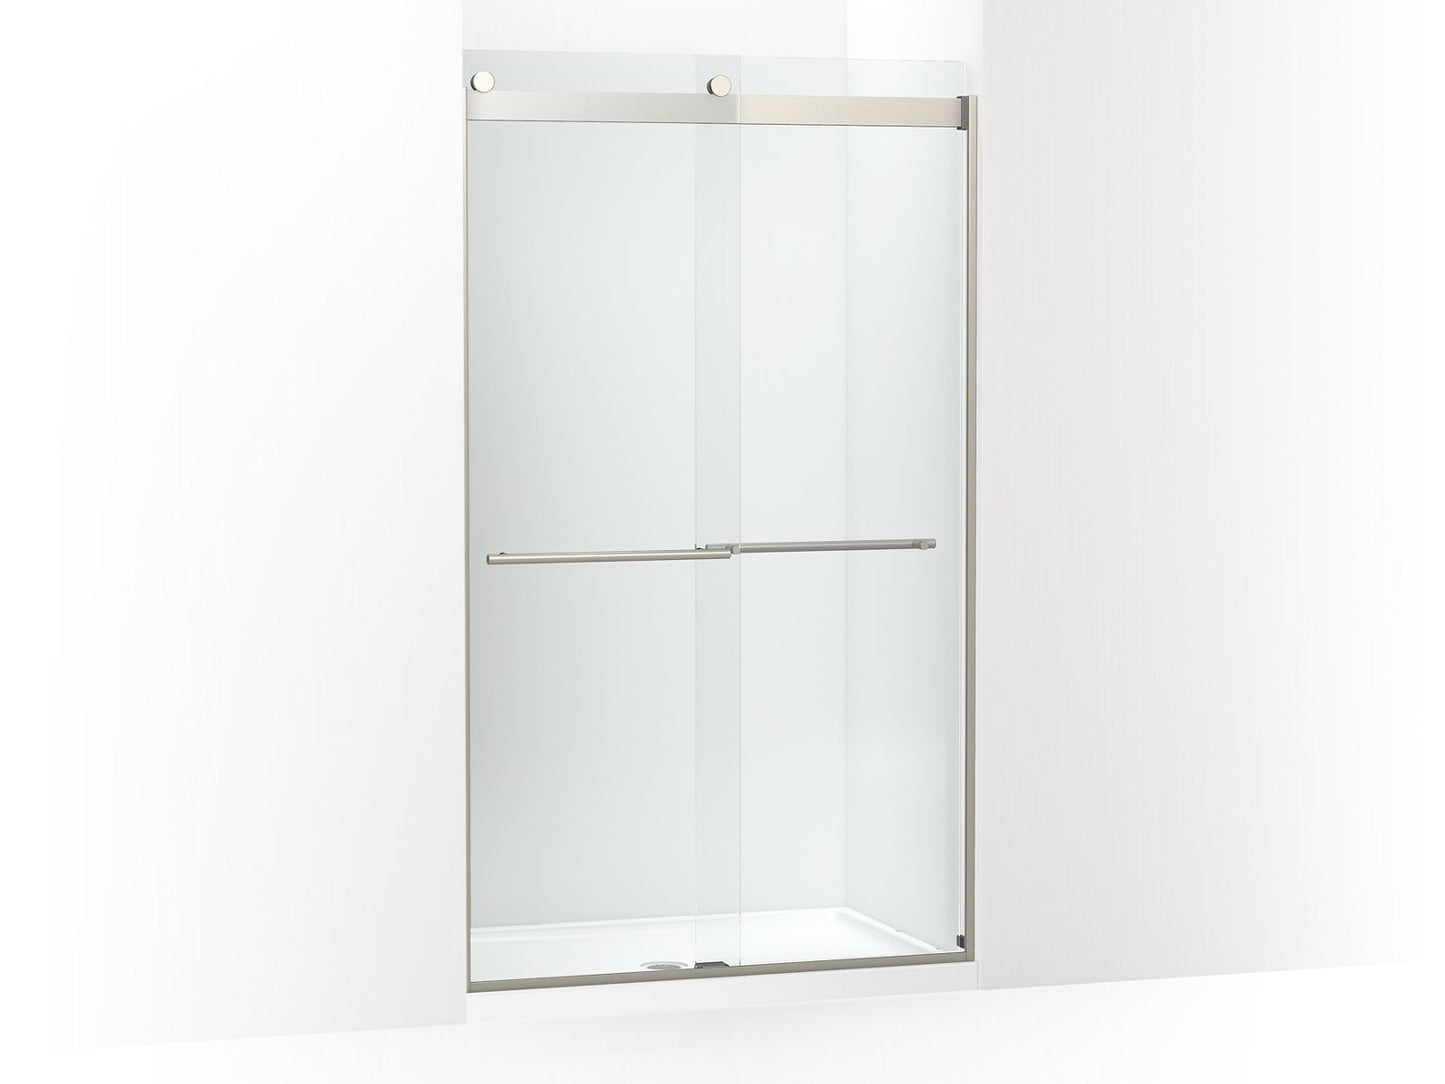 KOHLER K-702428-L-BNK Levity Plus Frameless Sliding Shower Door, 81-5/8" H X 44-5/8 - 47-5/8" W, With 3/8"-Thick Crystal Clear Glass In Anodized Brushed Nickel